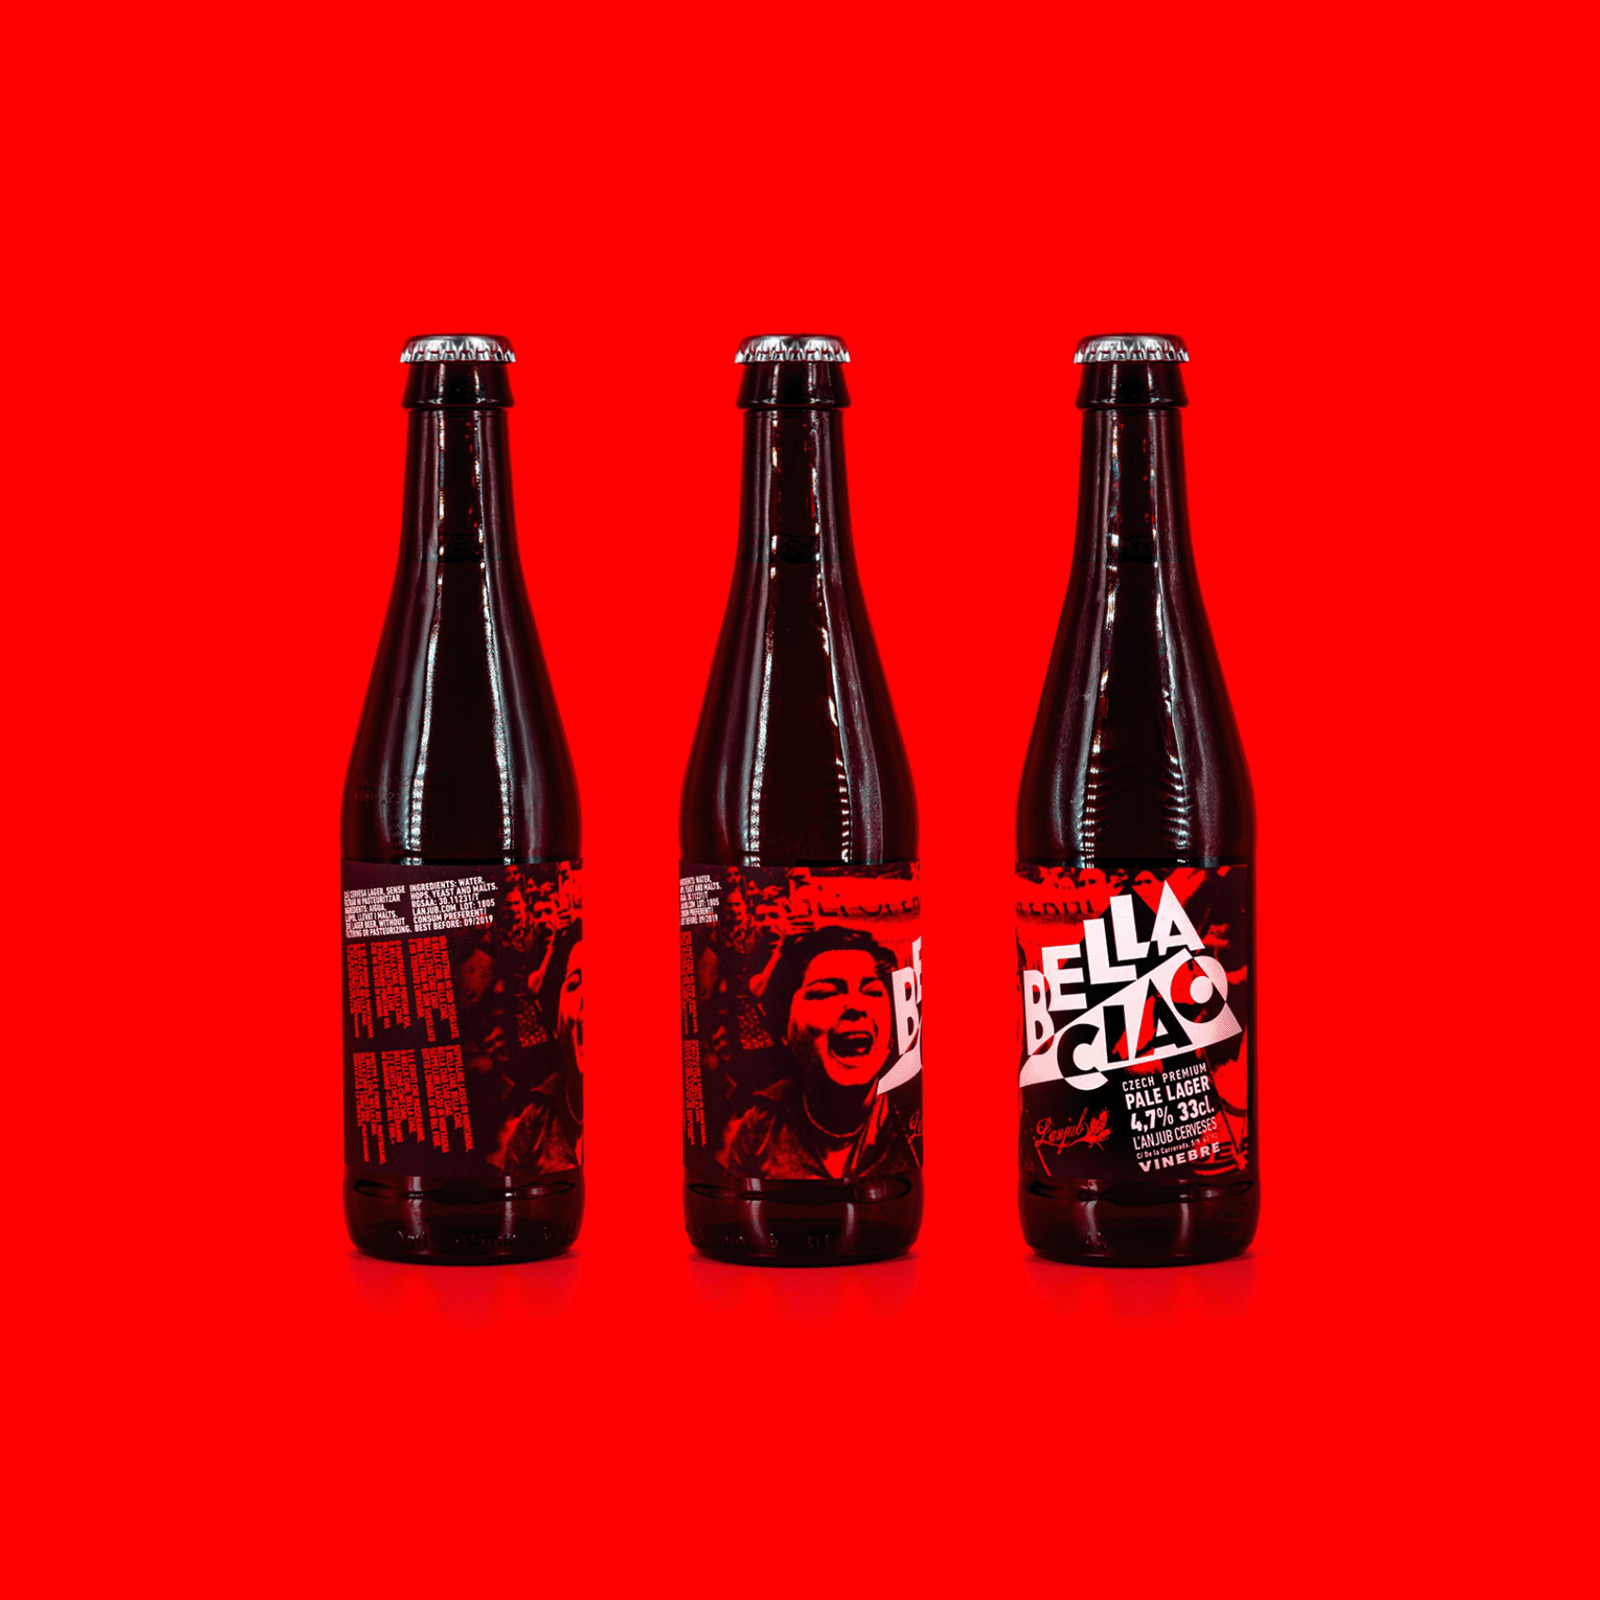 Futurism inspired packaging design for Bella Ciao Craft Beer 